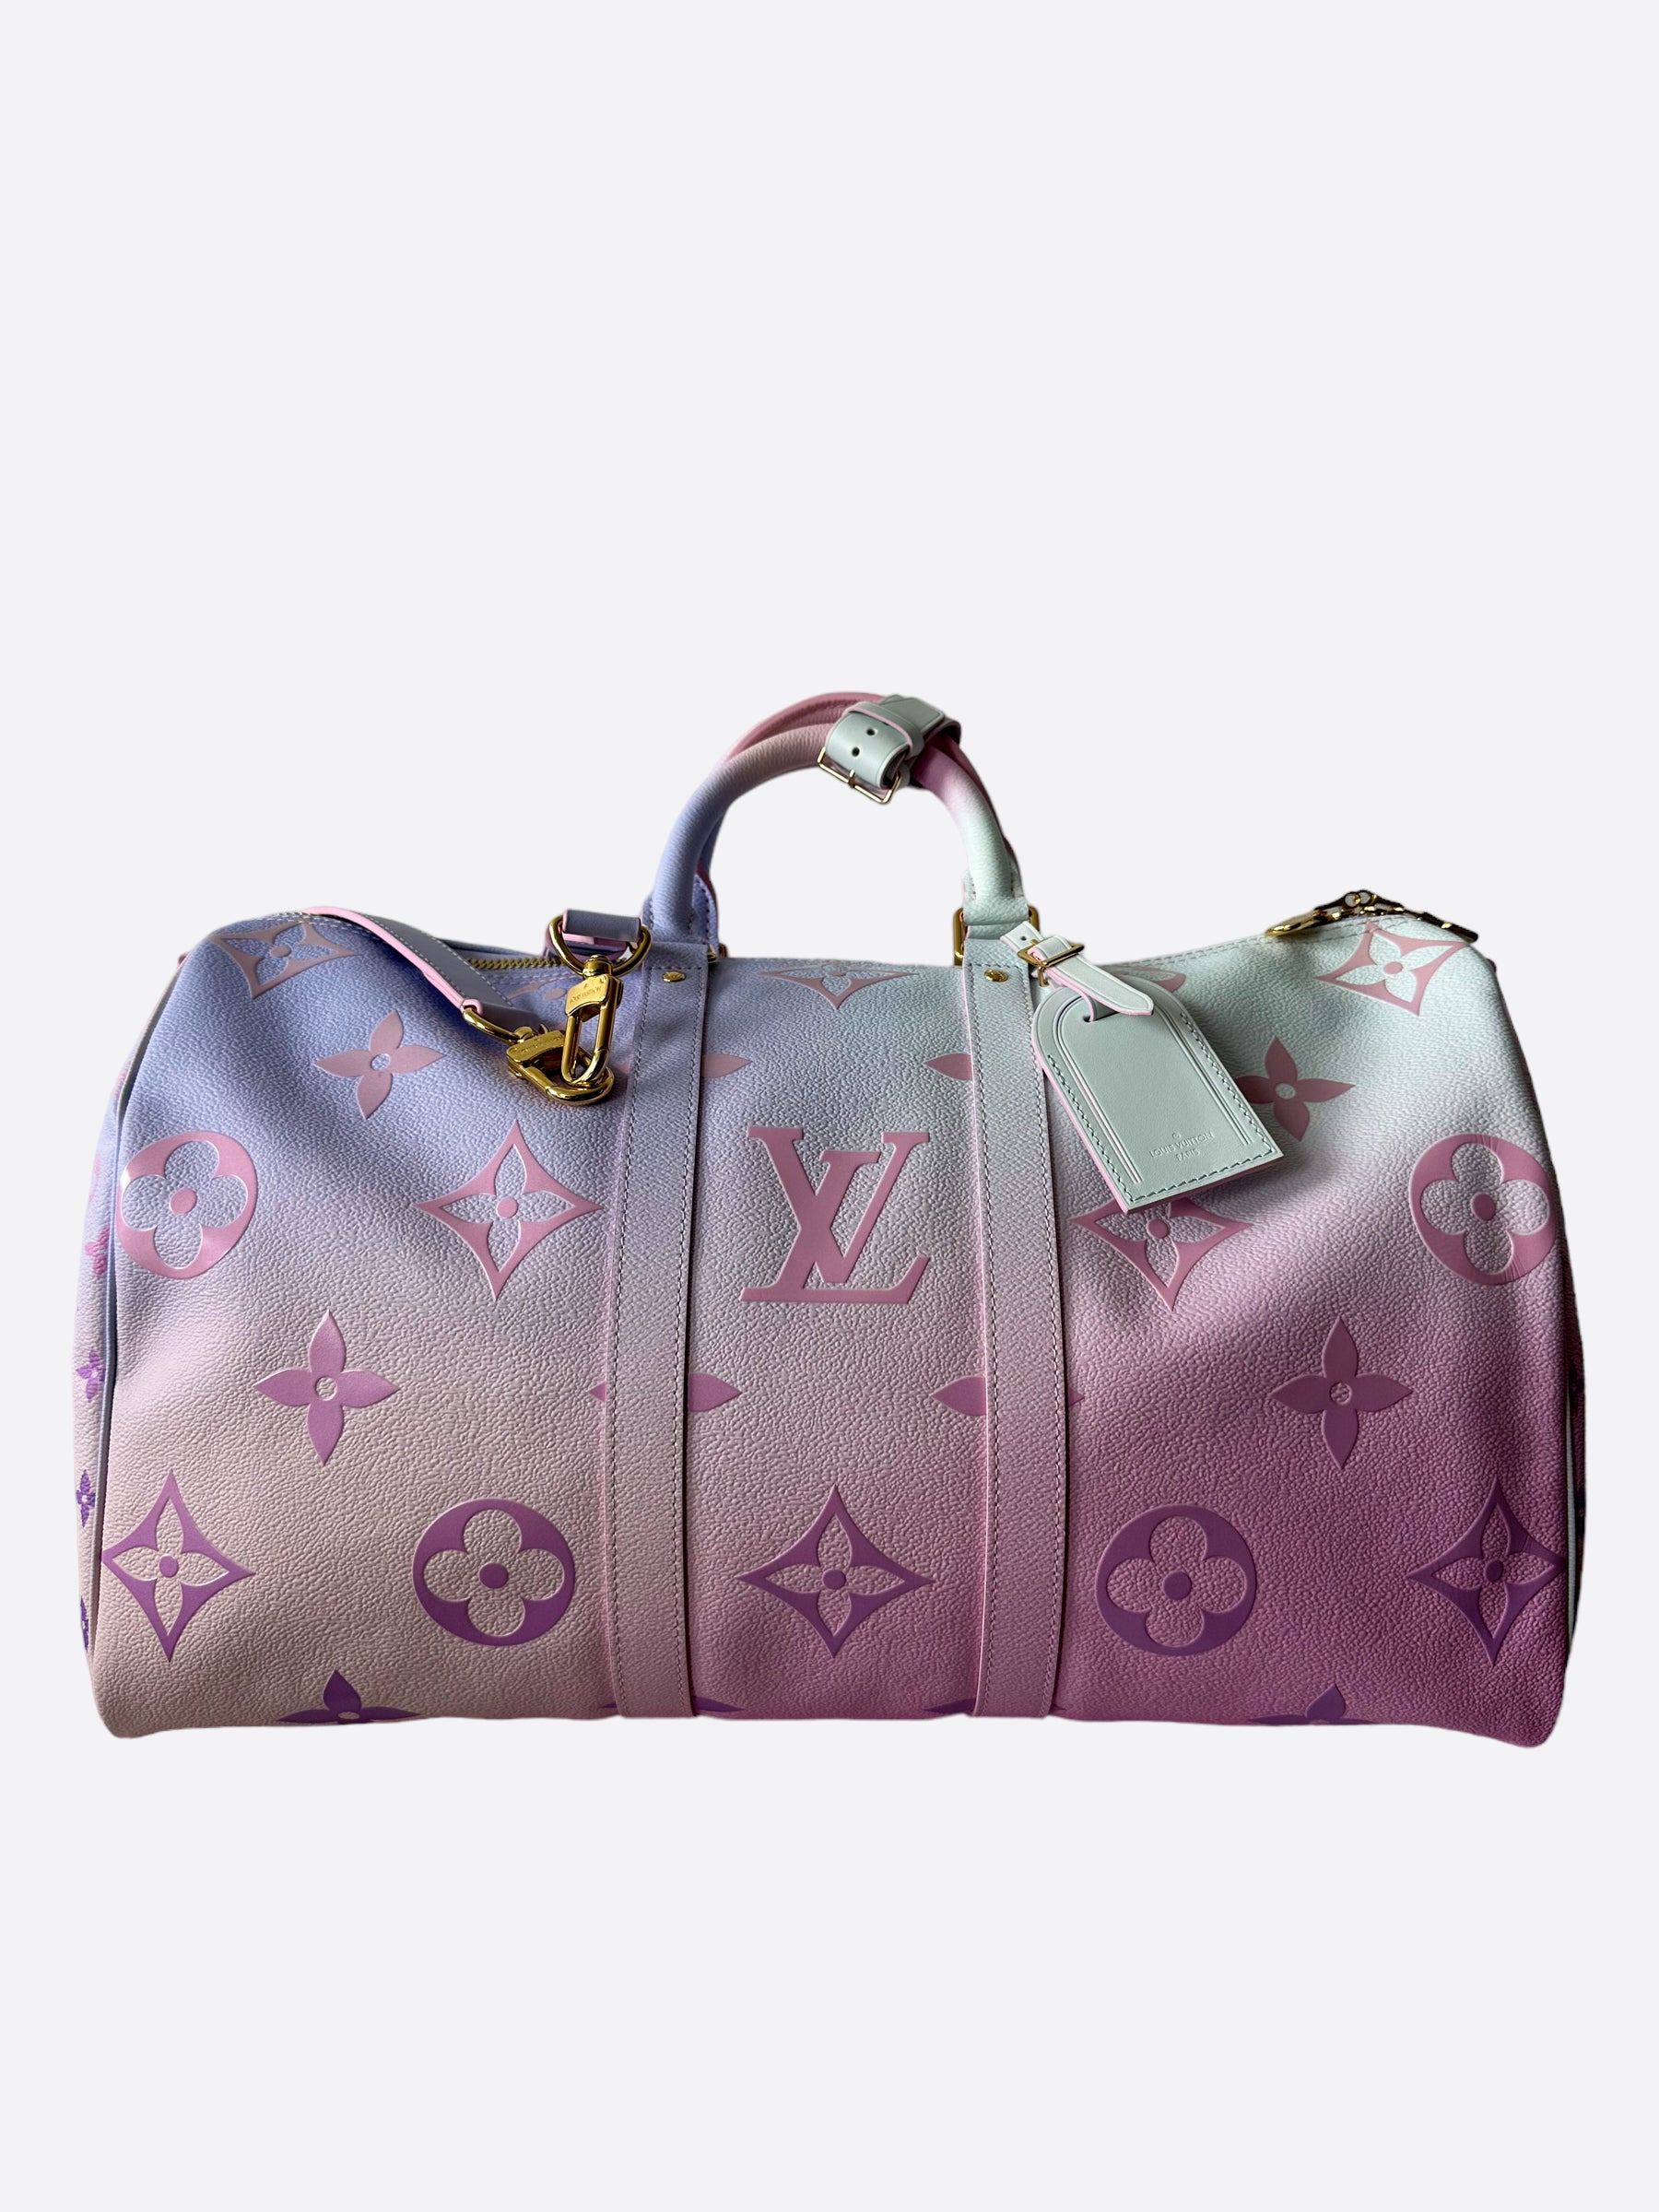 louis vuitton pink and purple bag